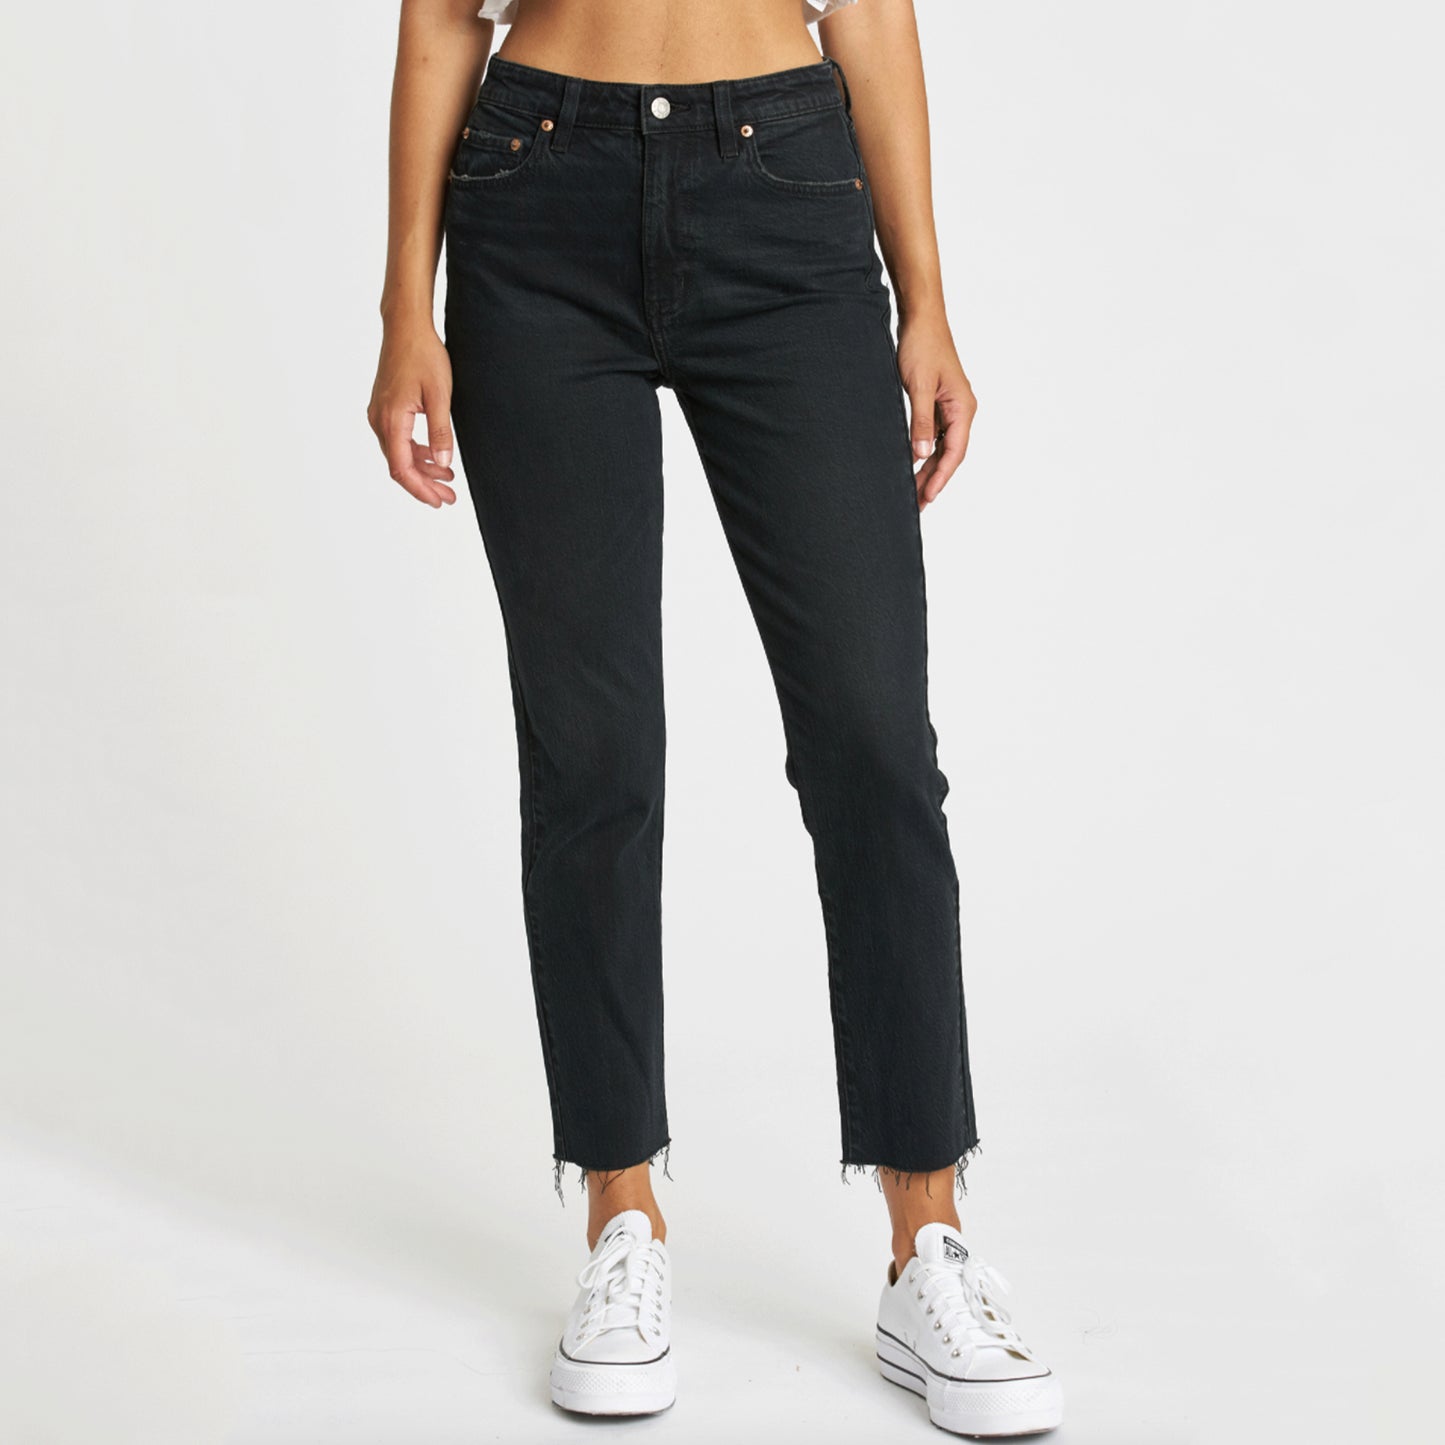 Daze Daily Driver High Rise Skinny Straight. They don't make them like this anymore, until now. The Daily Driver jean have an authentic vintage score. Mostly rigid but yields to your body in all the right ways where you need it to